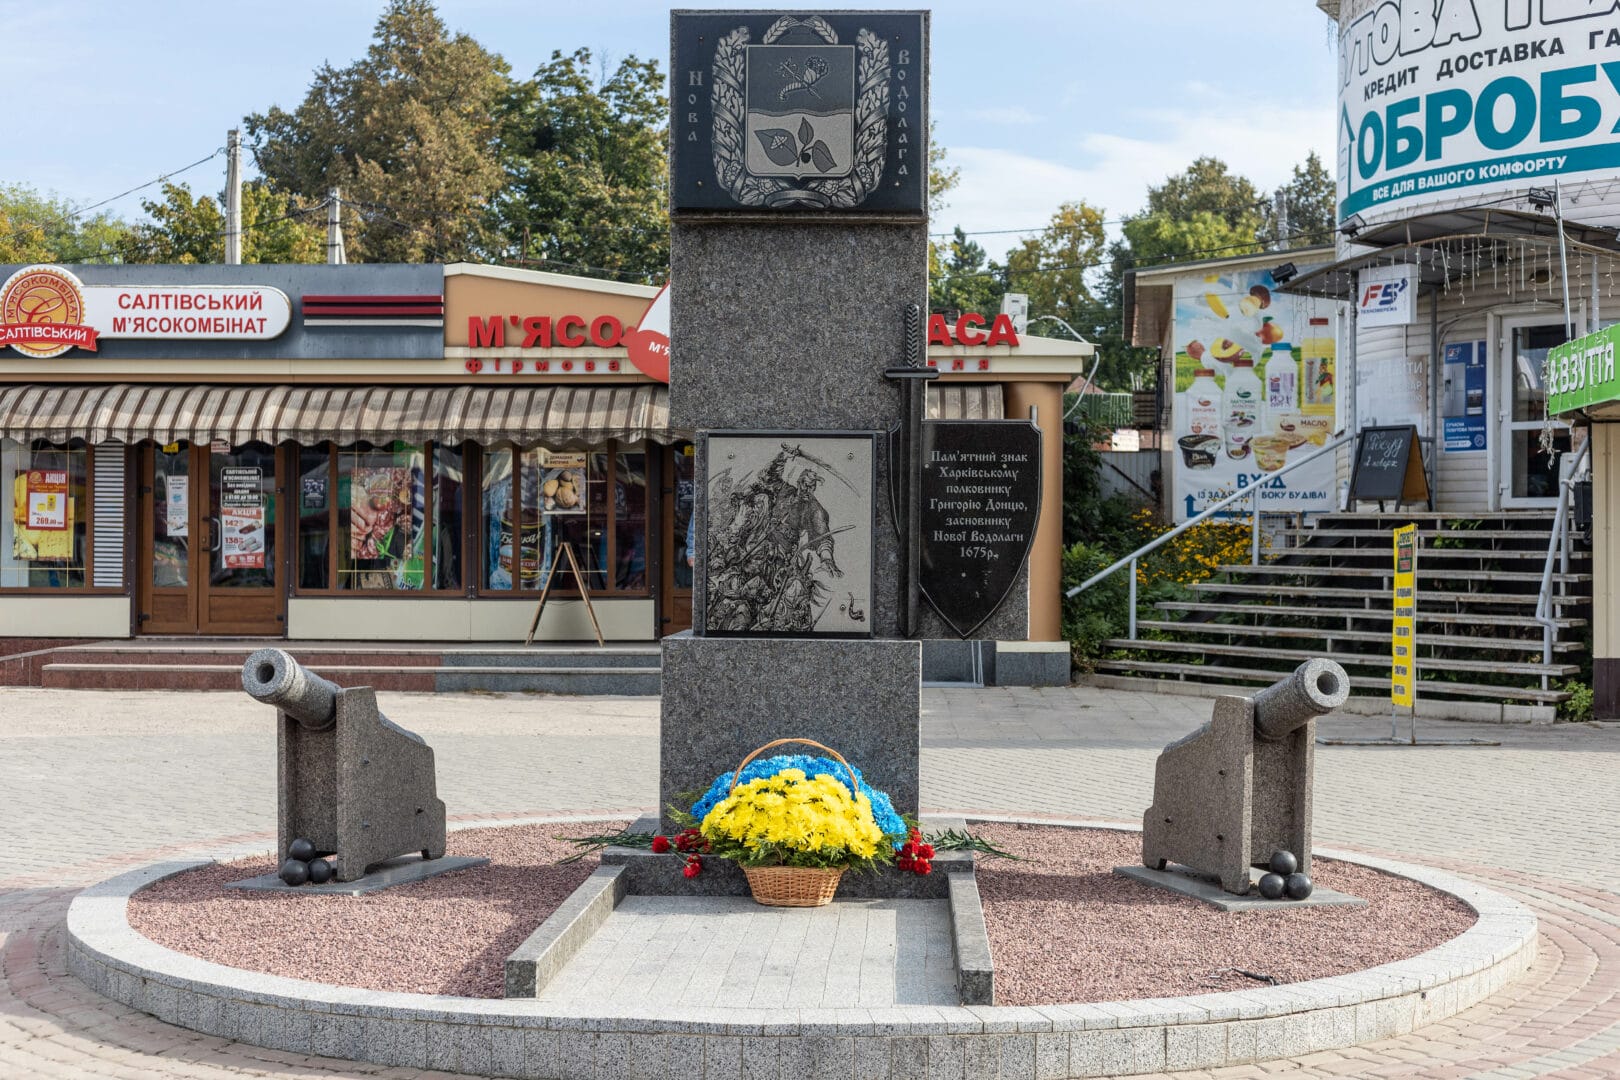 A monument to Hryhorii Donets